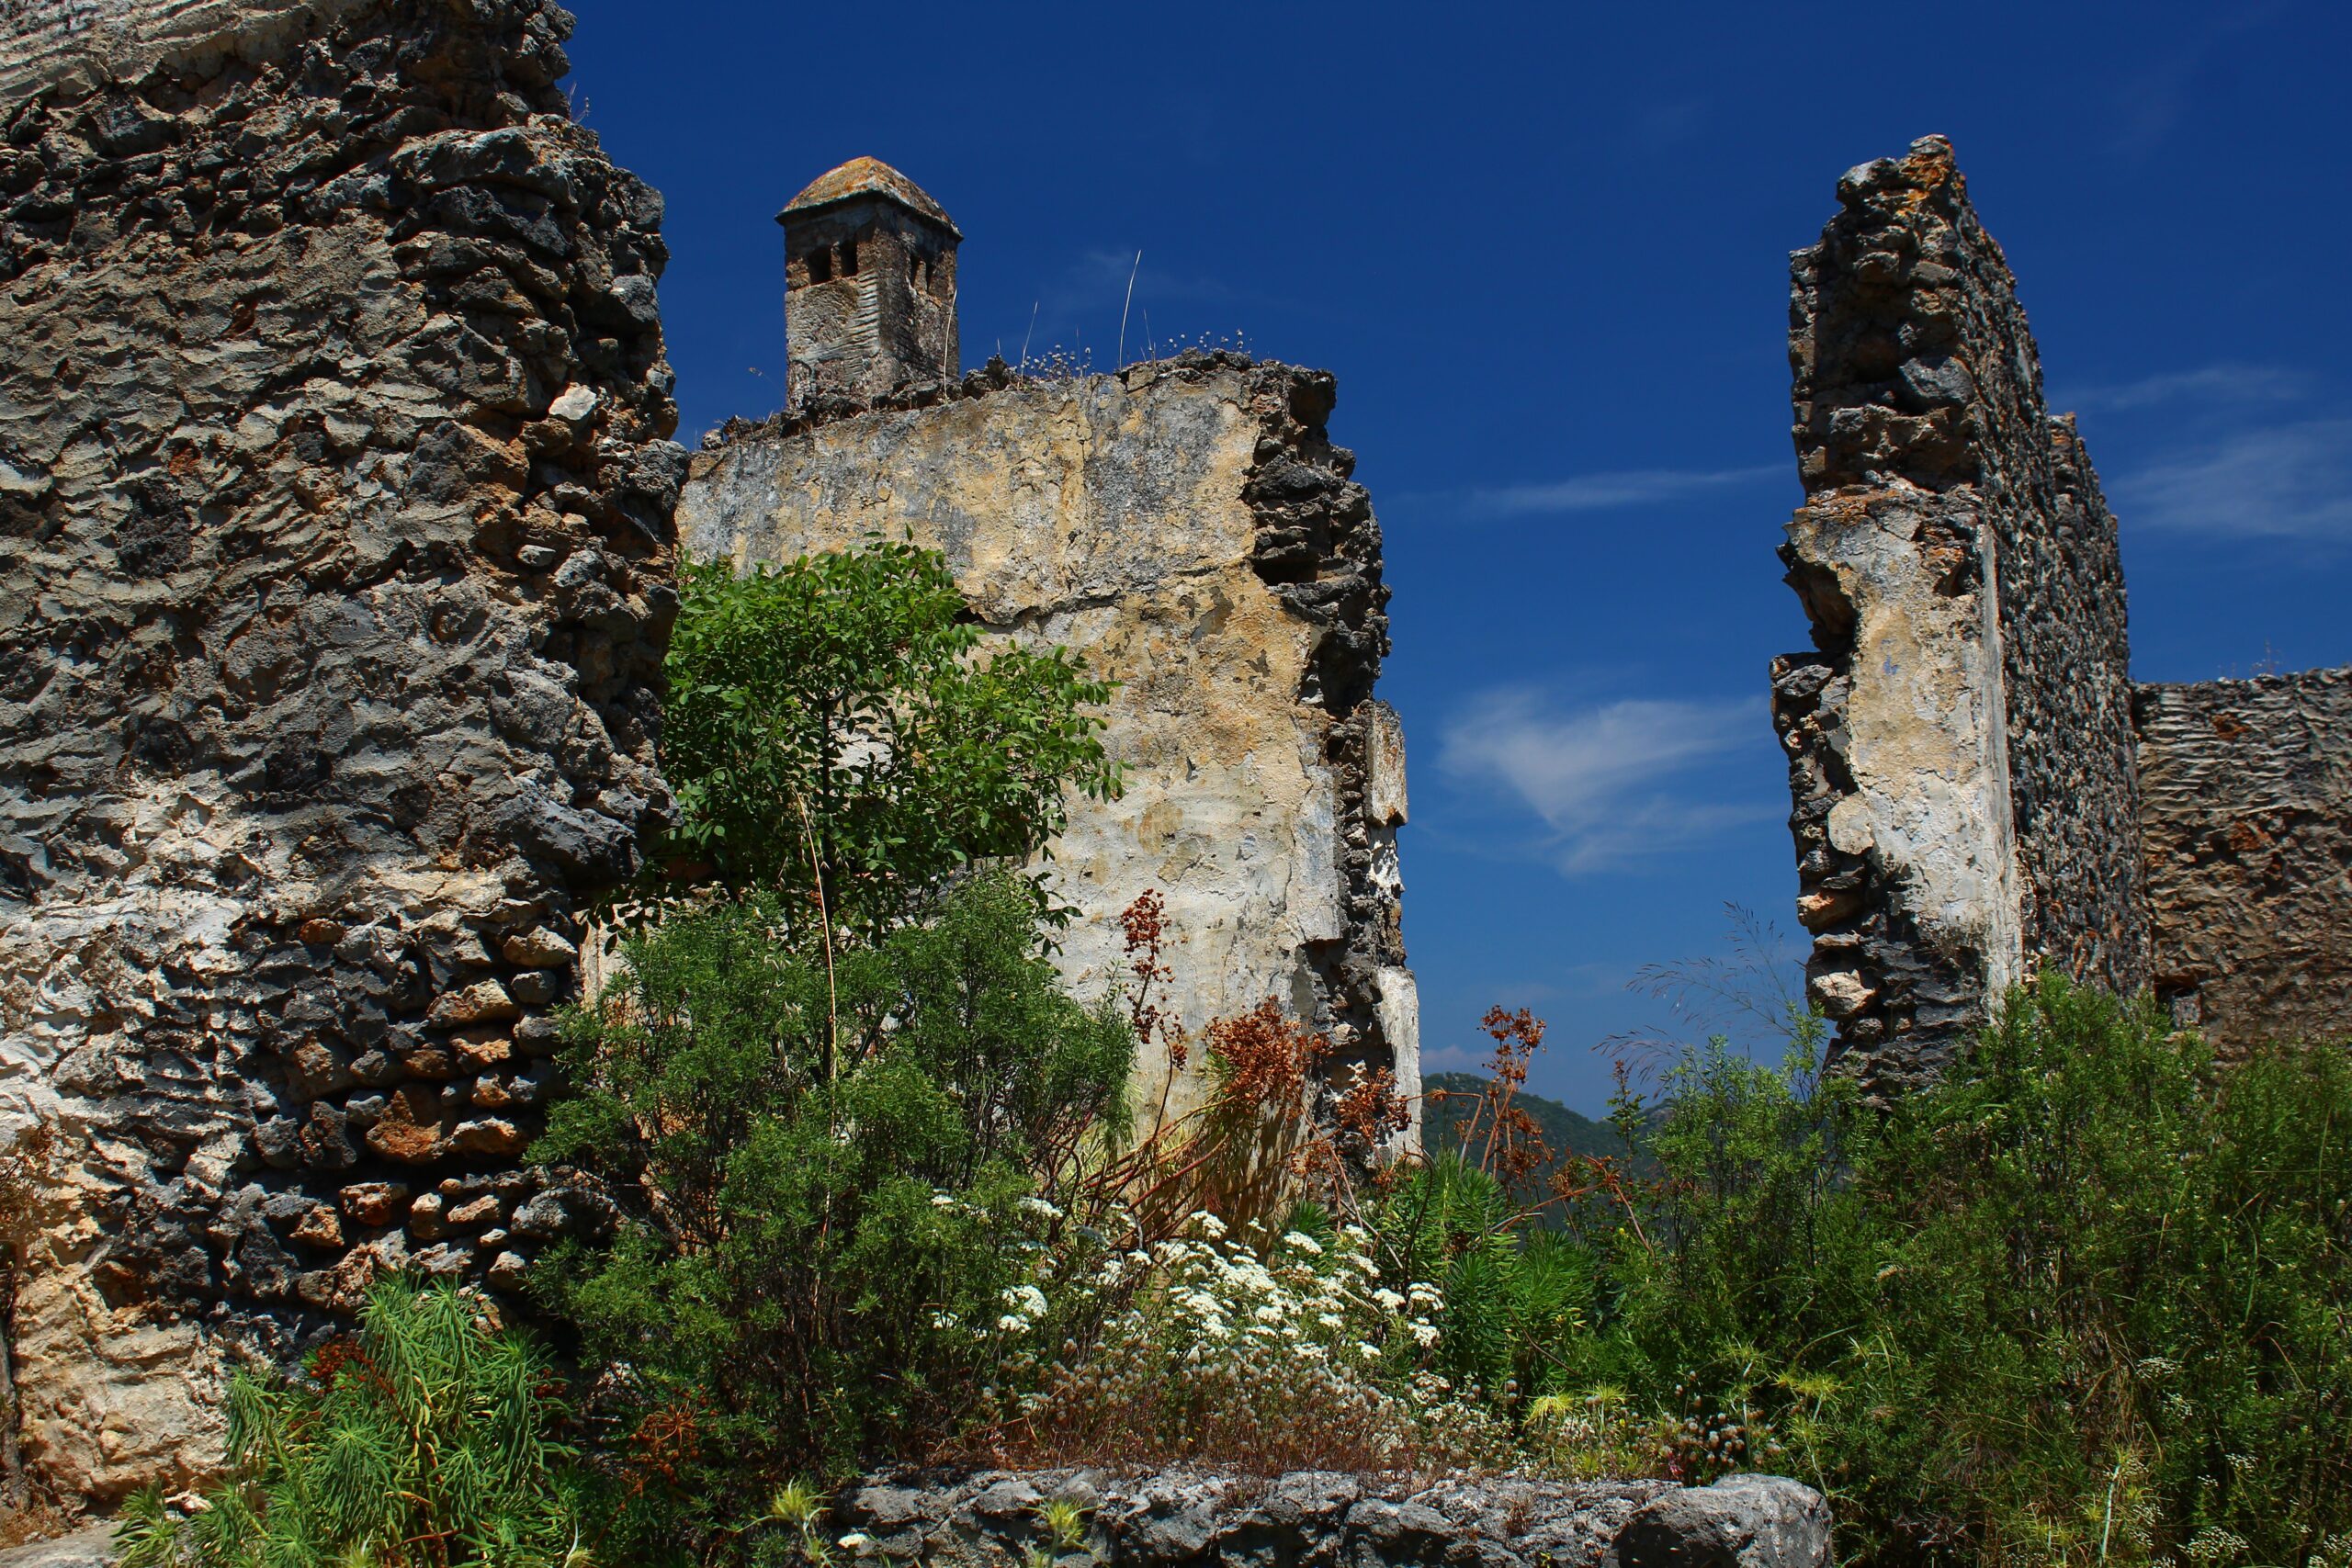 overgrown stone wall of an ancient town